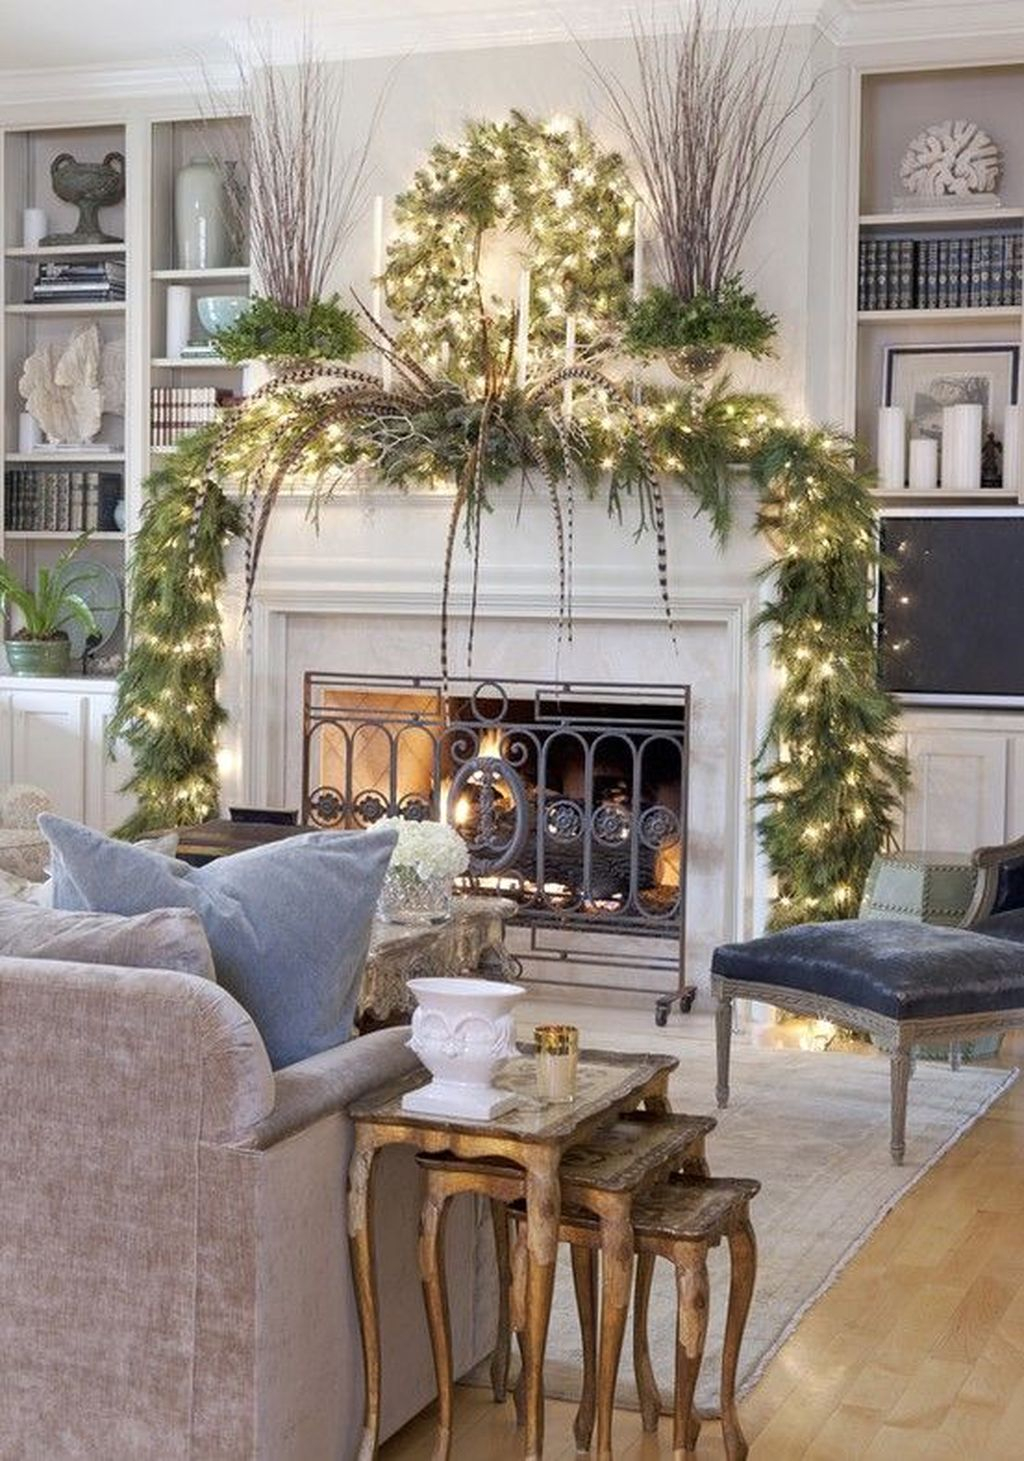 Fabulous Interior Design Ideas For Fall And Winter To Try Now37